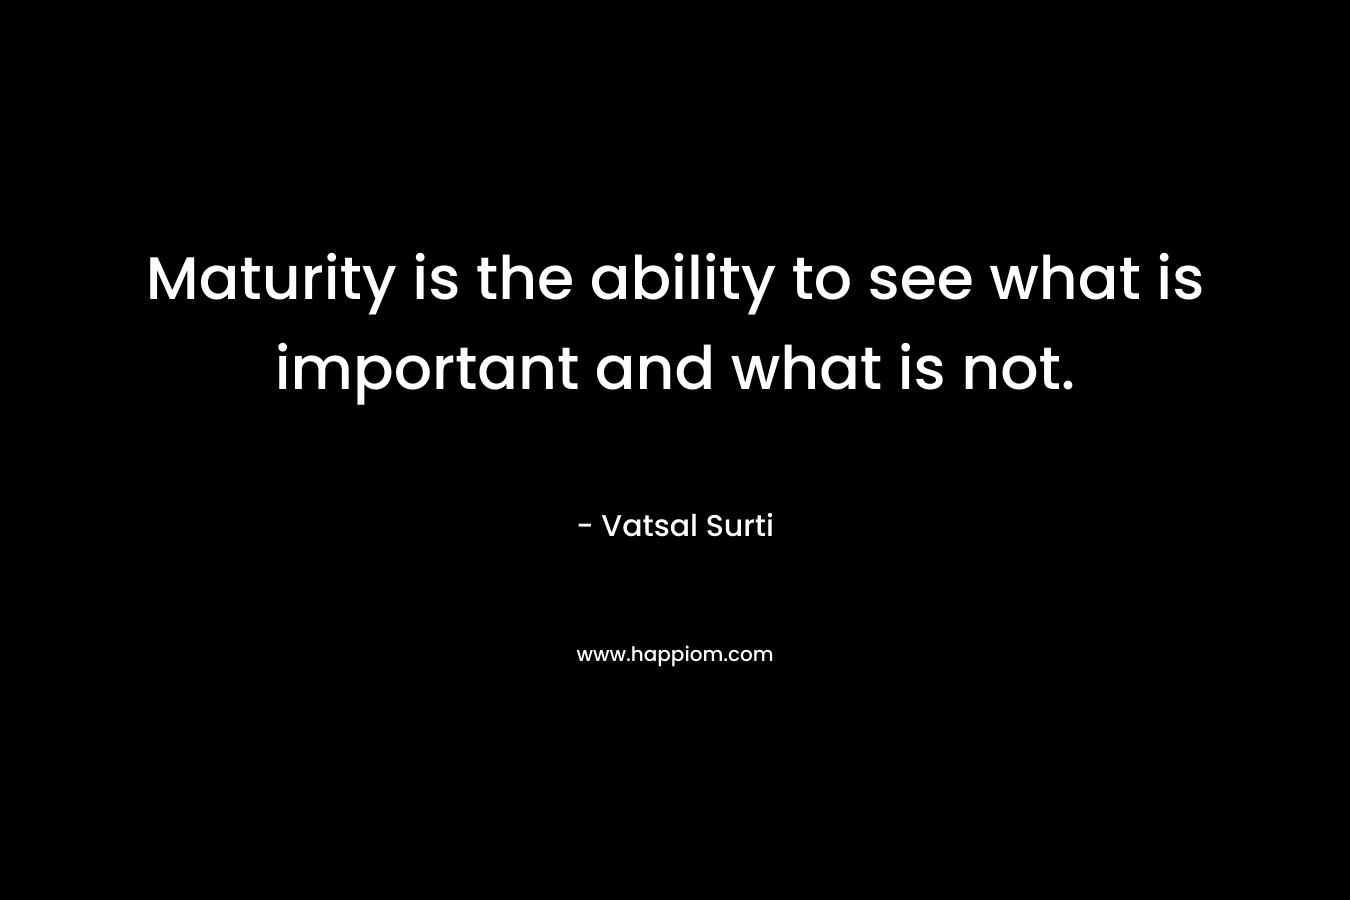 Maturity is the ability to see what is important and what is not. – Vatsal Surti